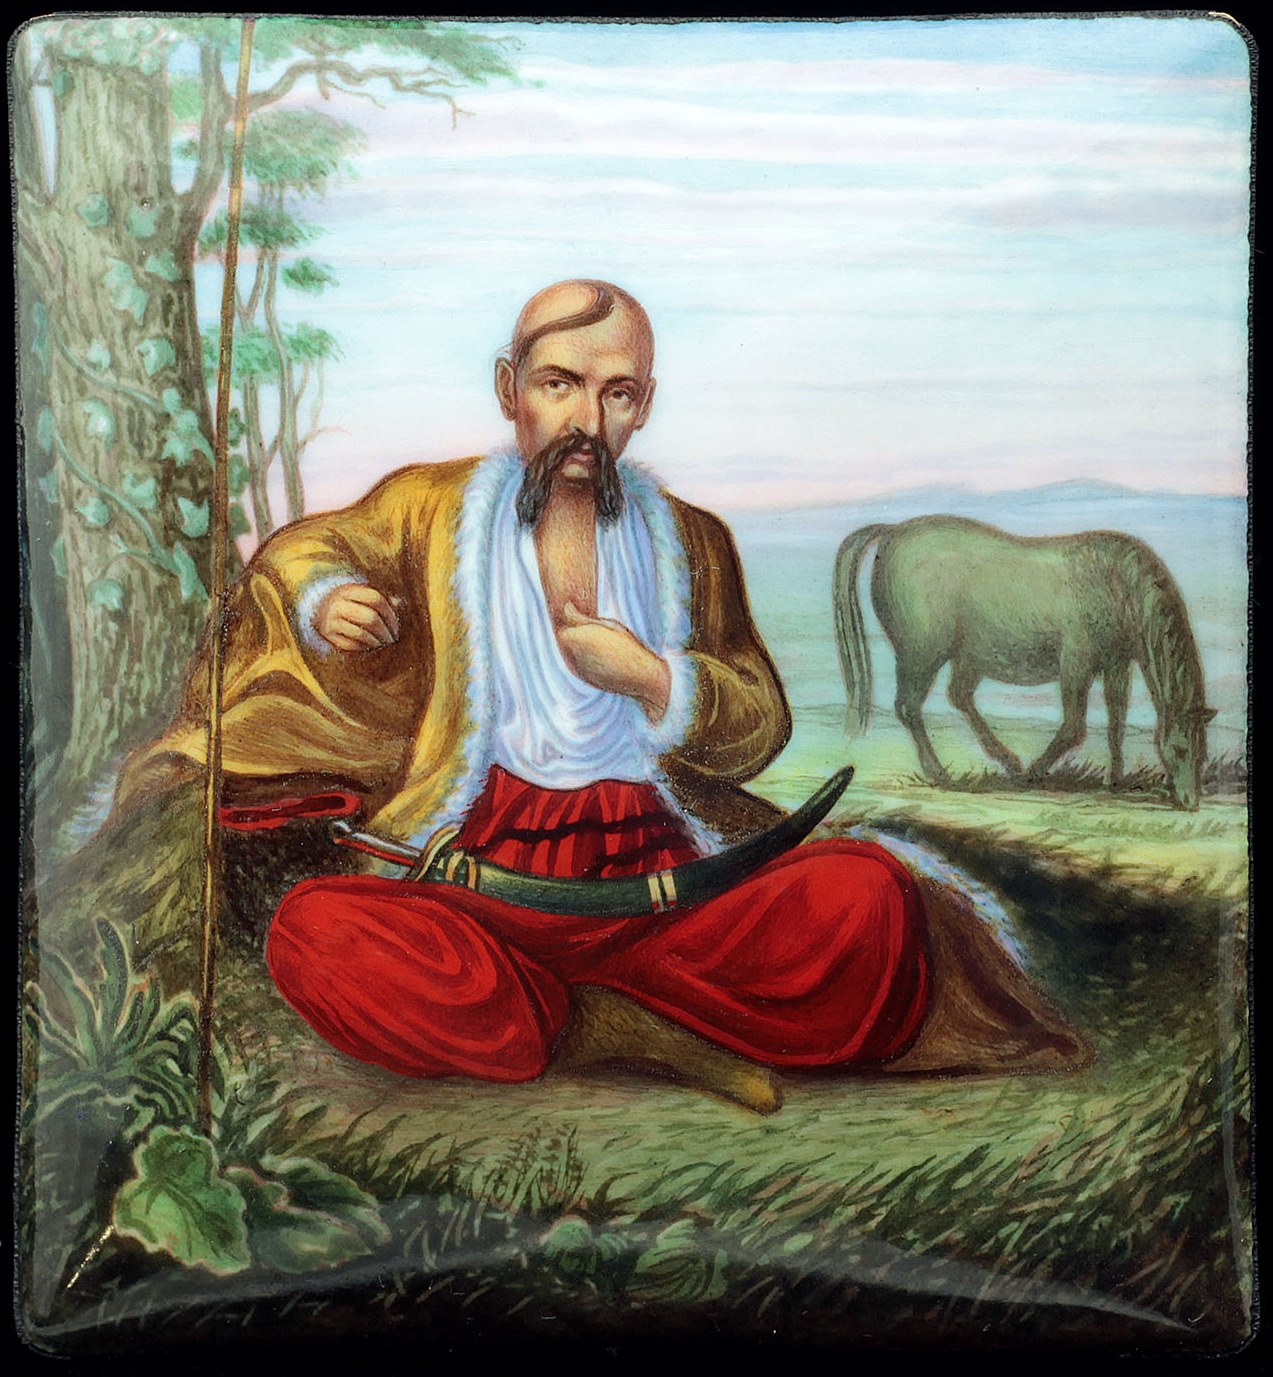 'Zaporizhzhia Cossack' after uknown painter from 19th century